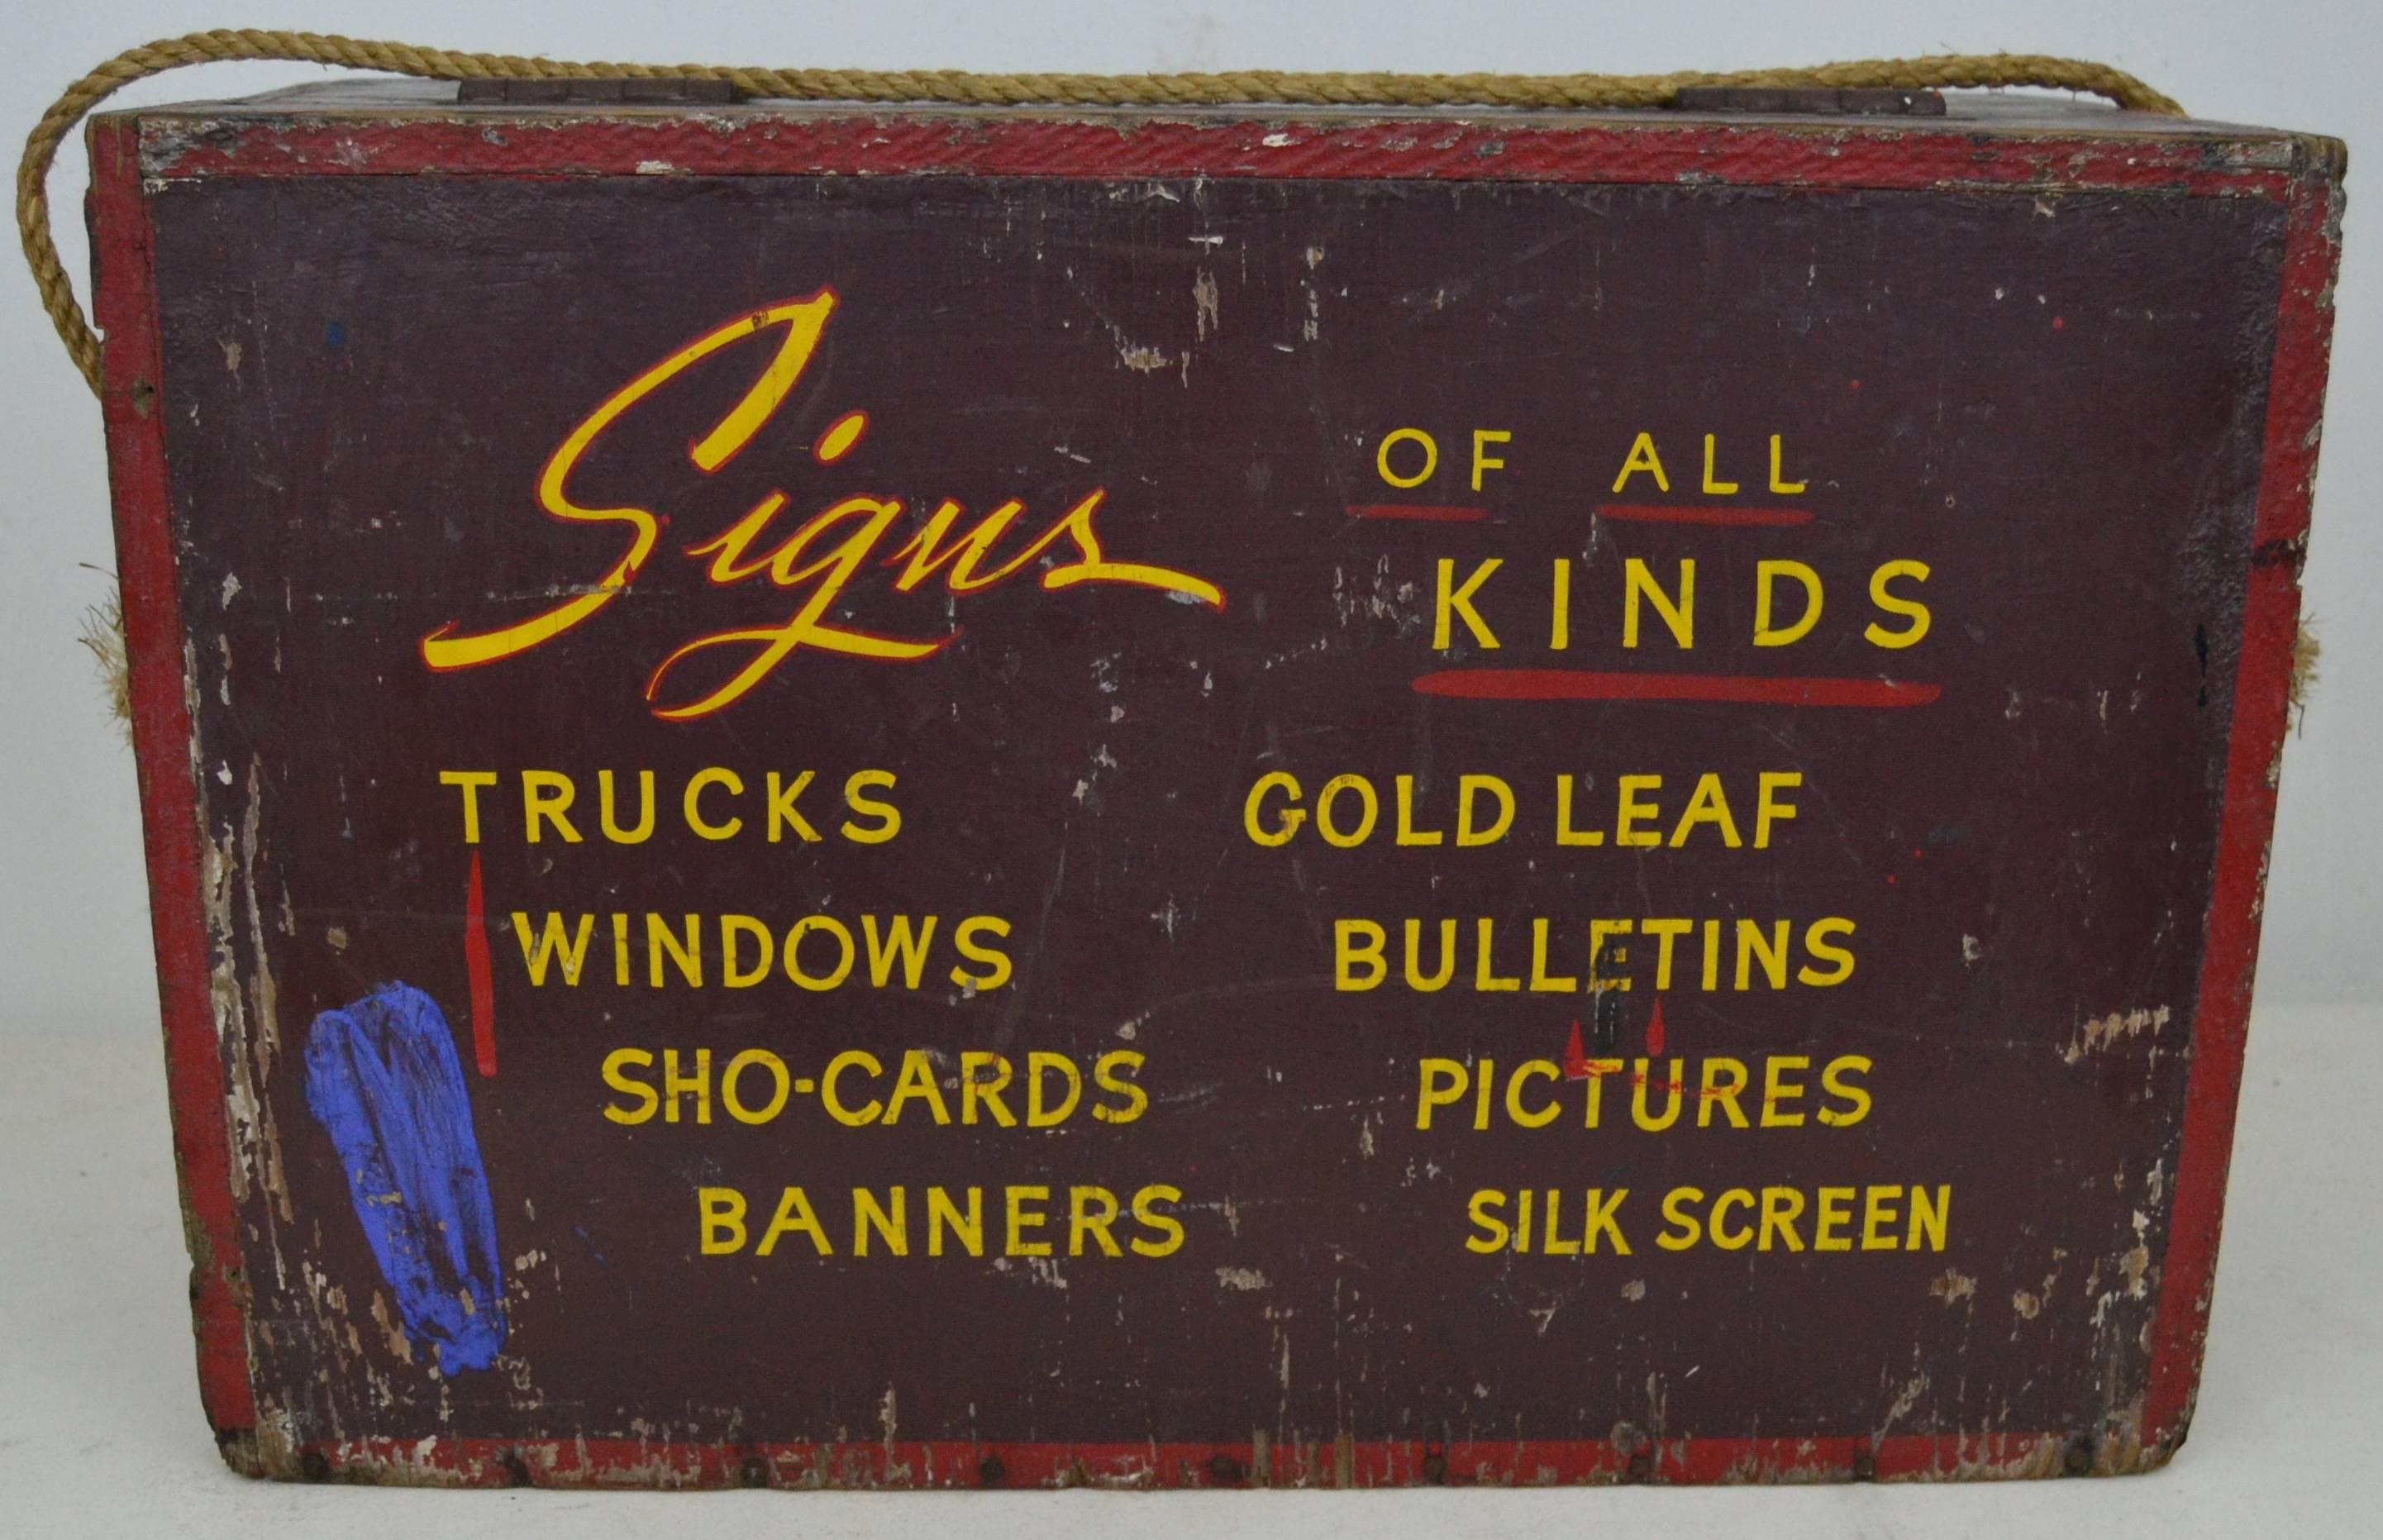 Hard to find Folk Art sign painter's box, bright yellow interior and rope handle.